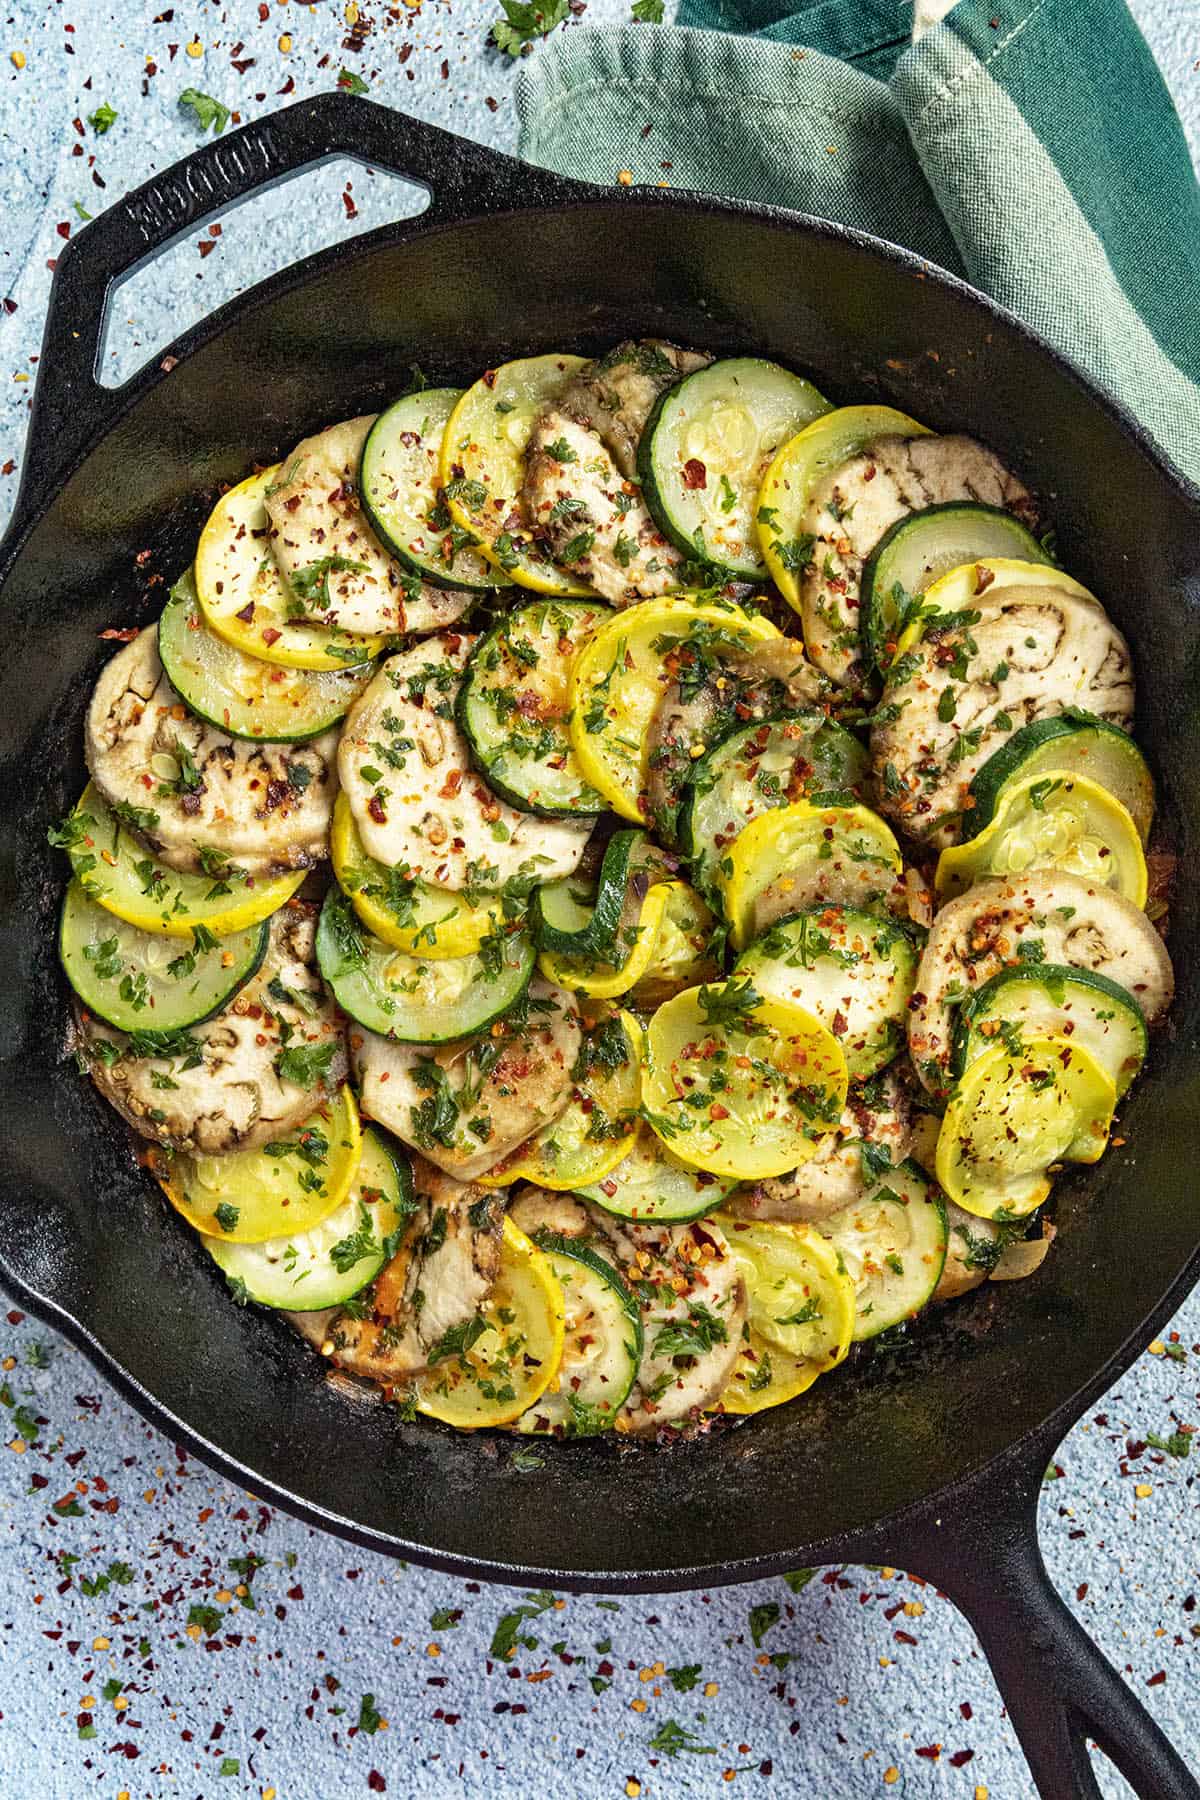 Ratatouille in a hot pan, ready to serve